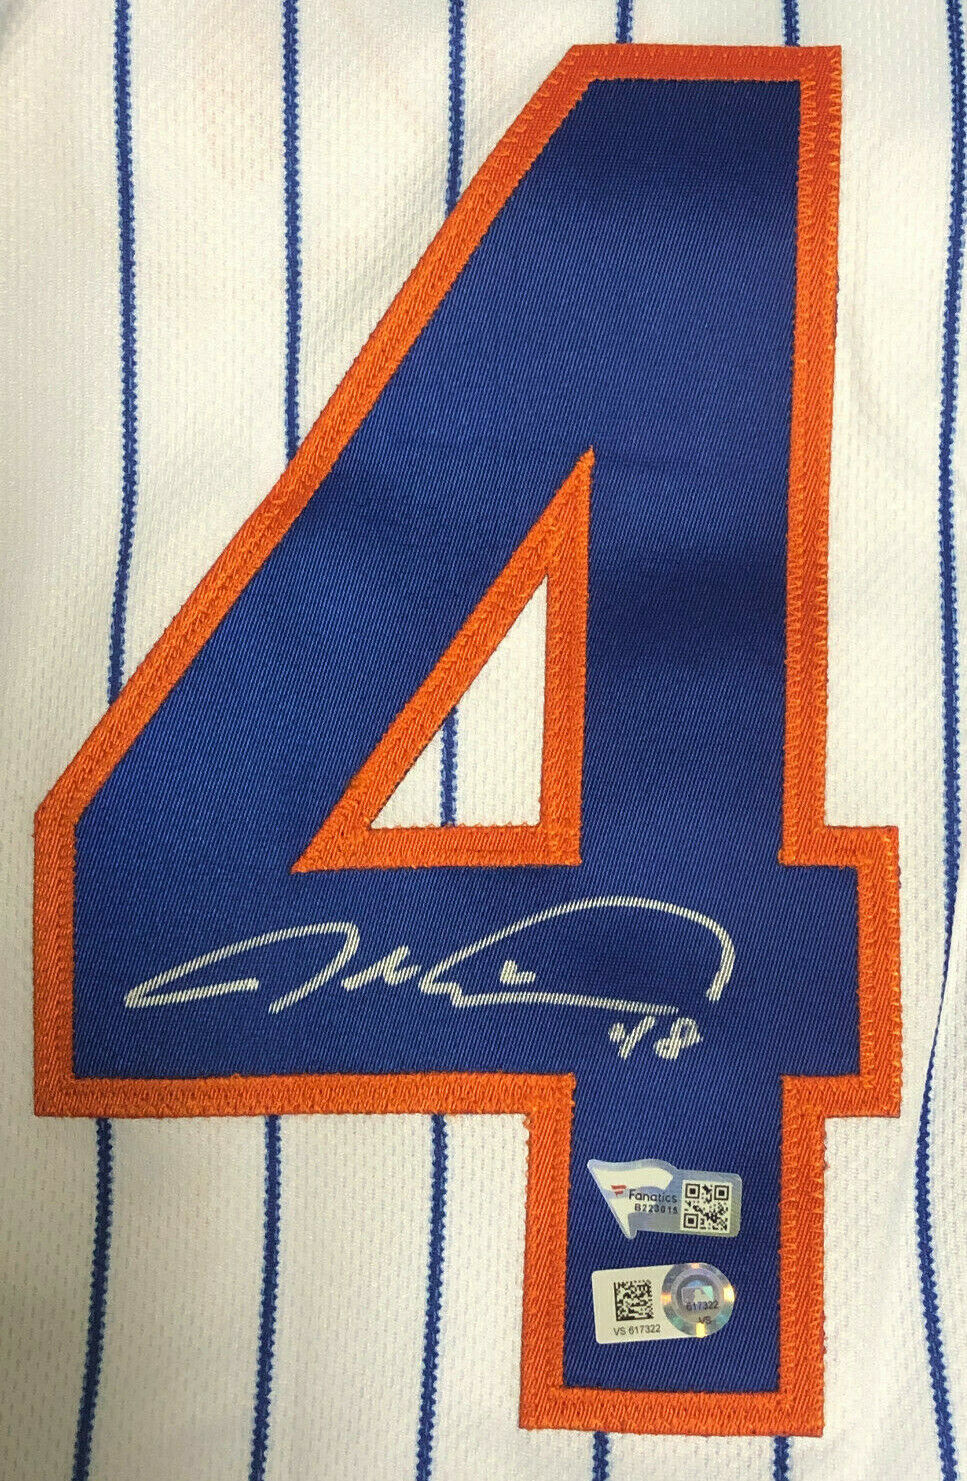 Jacob deGrom New York Mets Fanatics Authentic Autographed Jersey